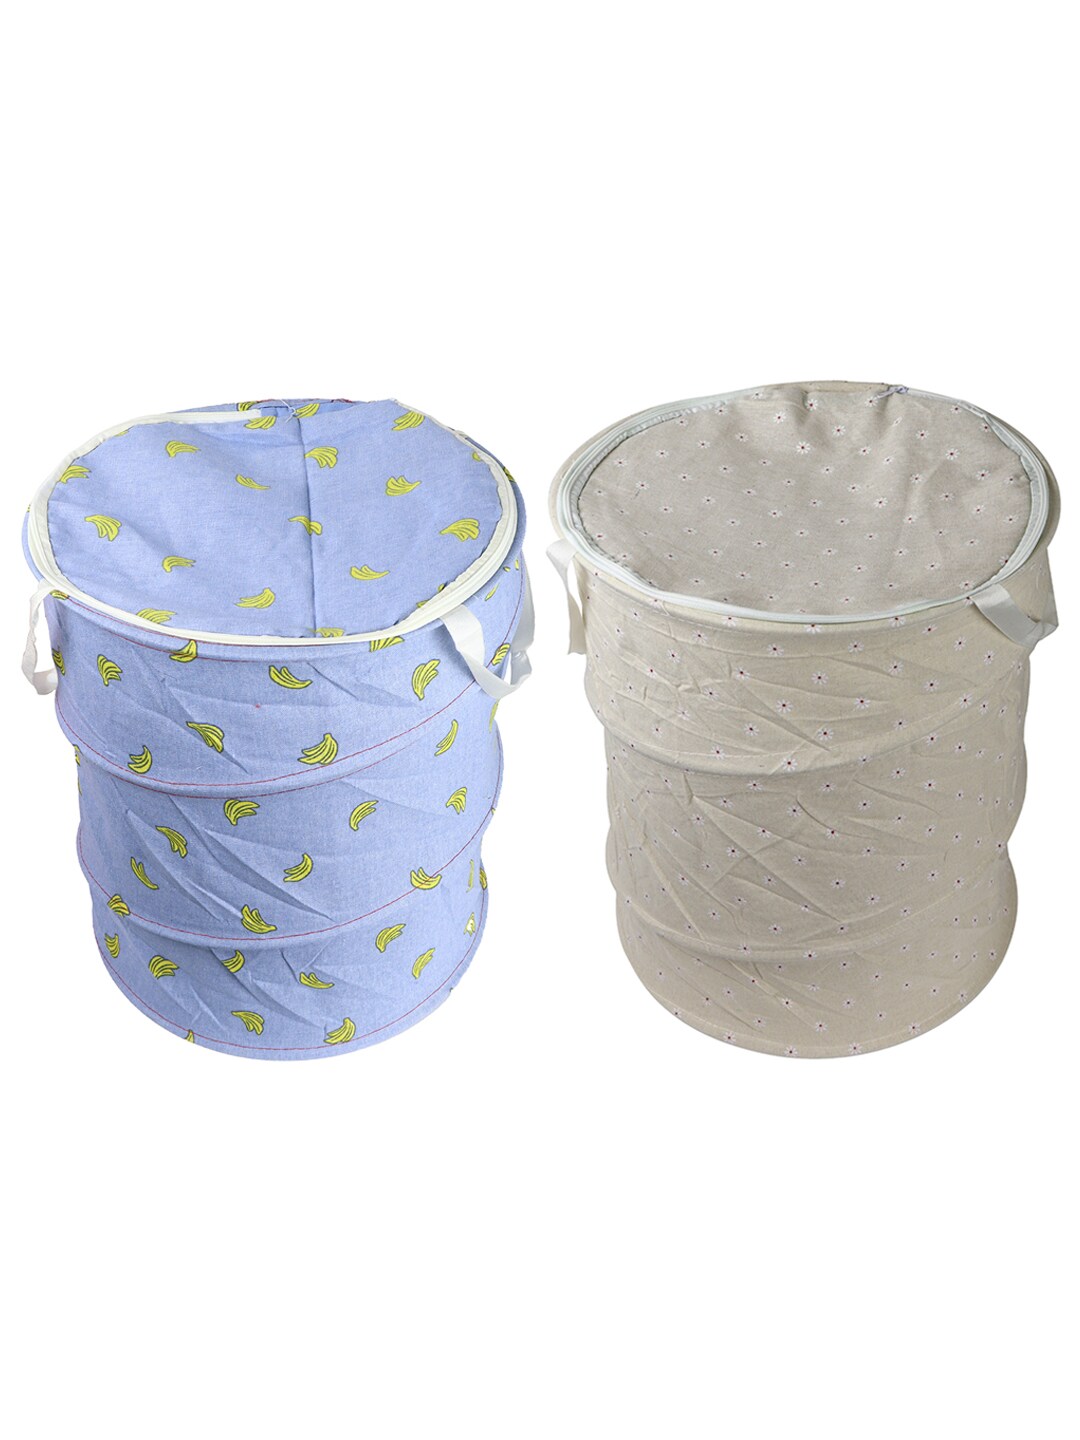 OddCroft Set Of 2 Printed Foldable Laundry Bag Price in India